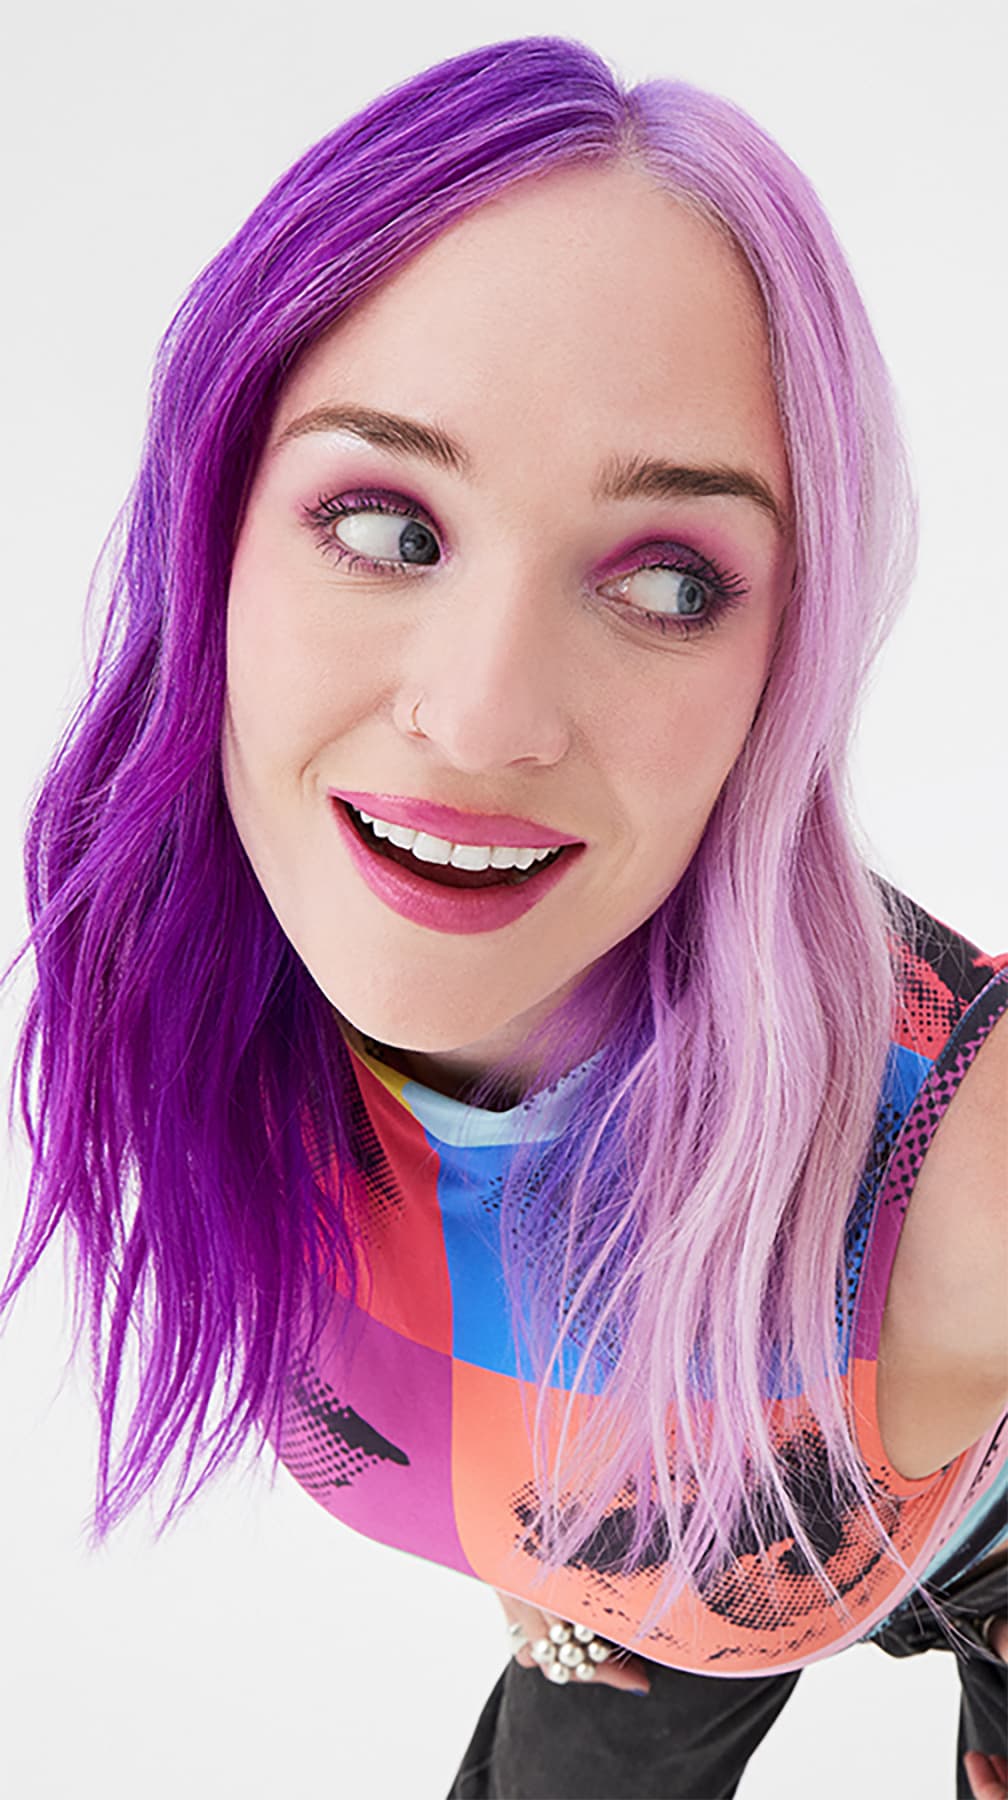 Enthusiastic woman with a bright smile, showcasing Arctic Fox's Purple AF and Girls Night hair colors, creating a stunning ombre effect from deep purple to soft lavender.